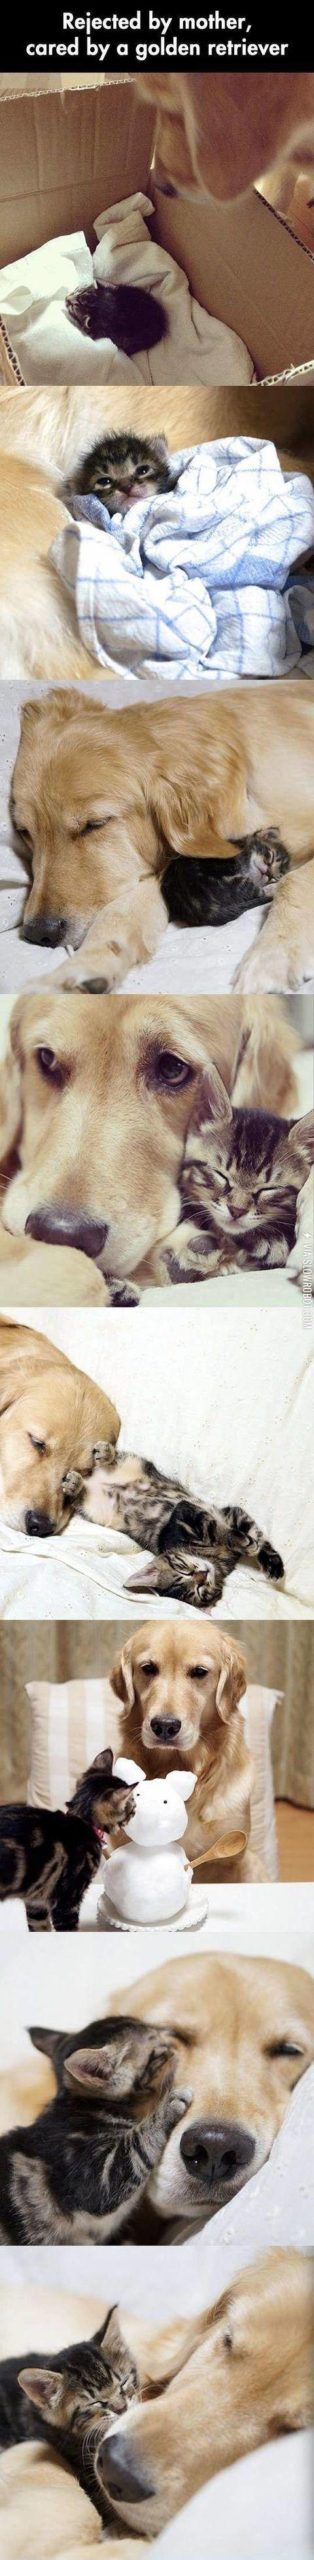 Golden+retriever+adopts+a+kitten+abandoned+by+its+mother